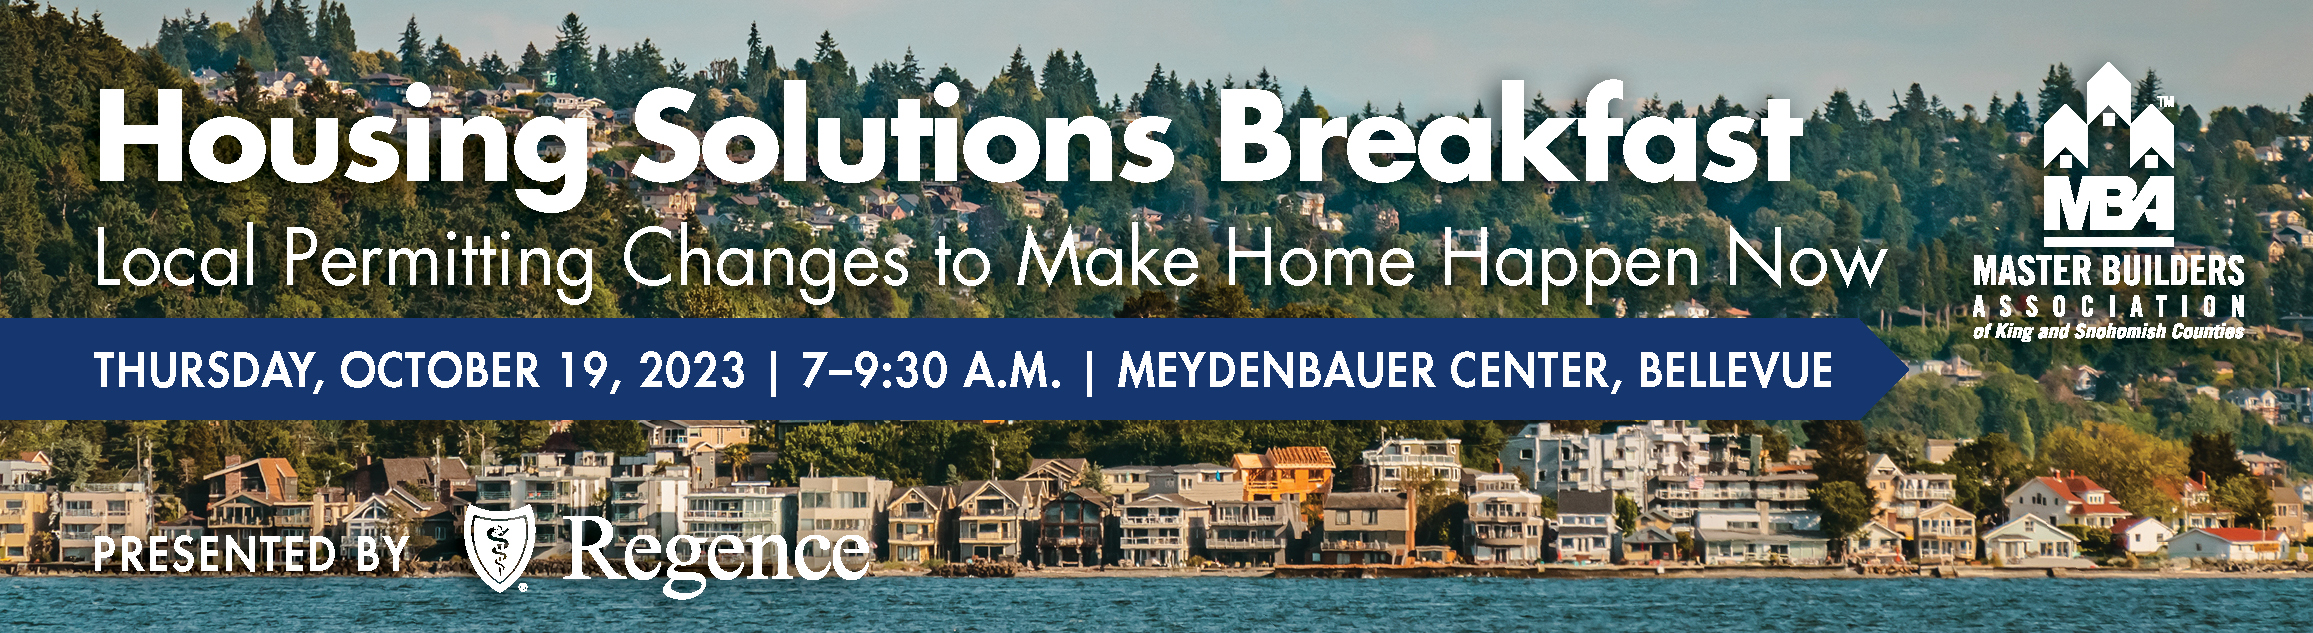 MBAKS Housing Solutions Breakfast: Local Permitting Changes to Make Home Happen Now